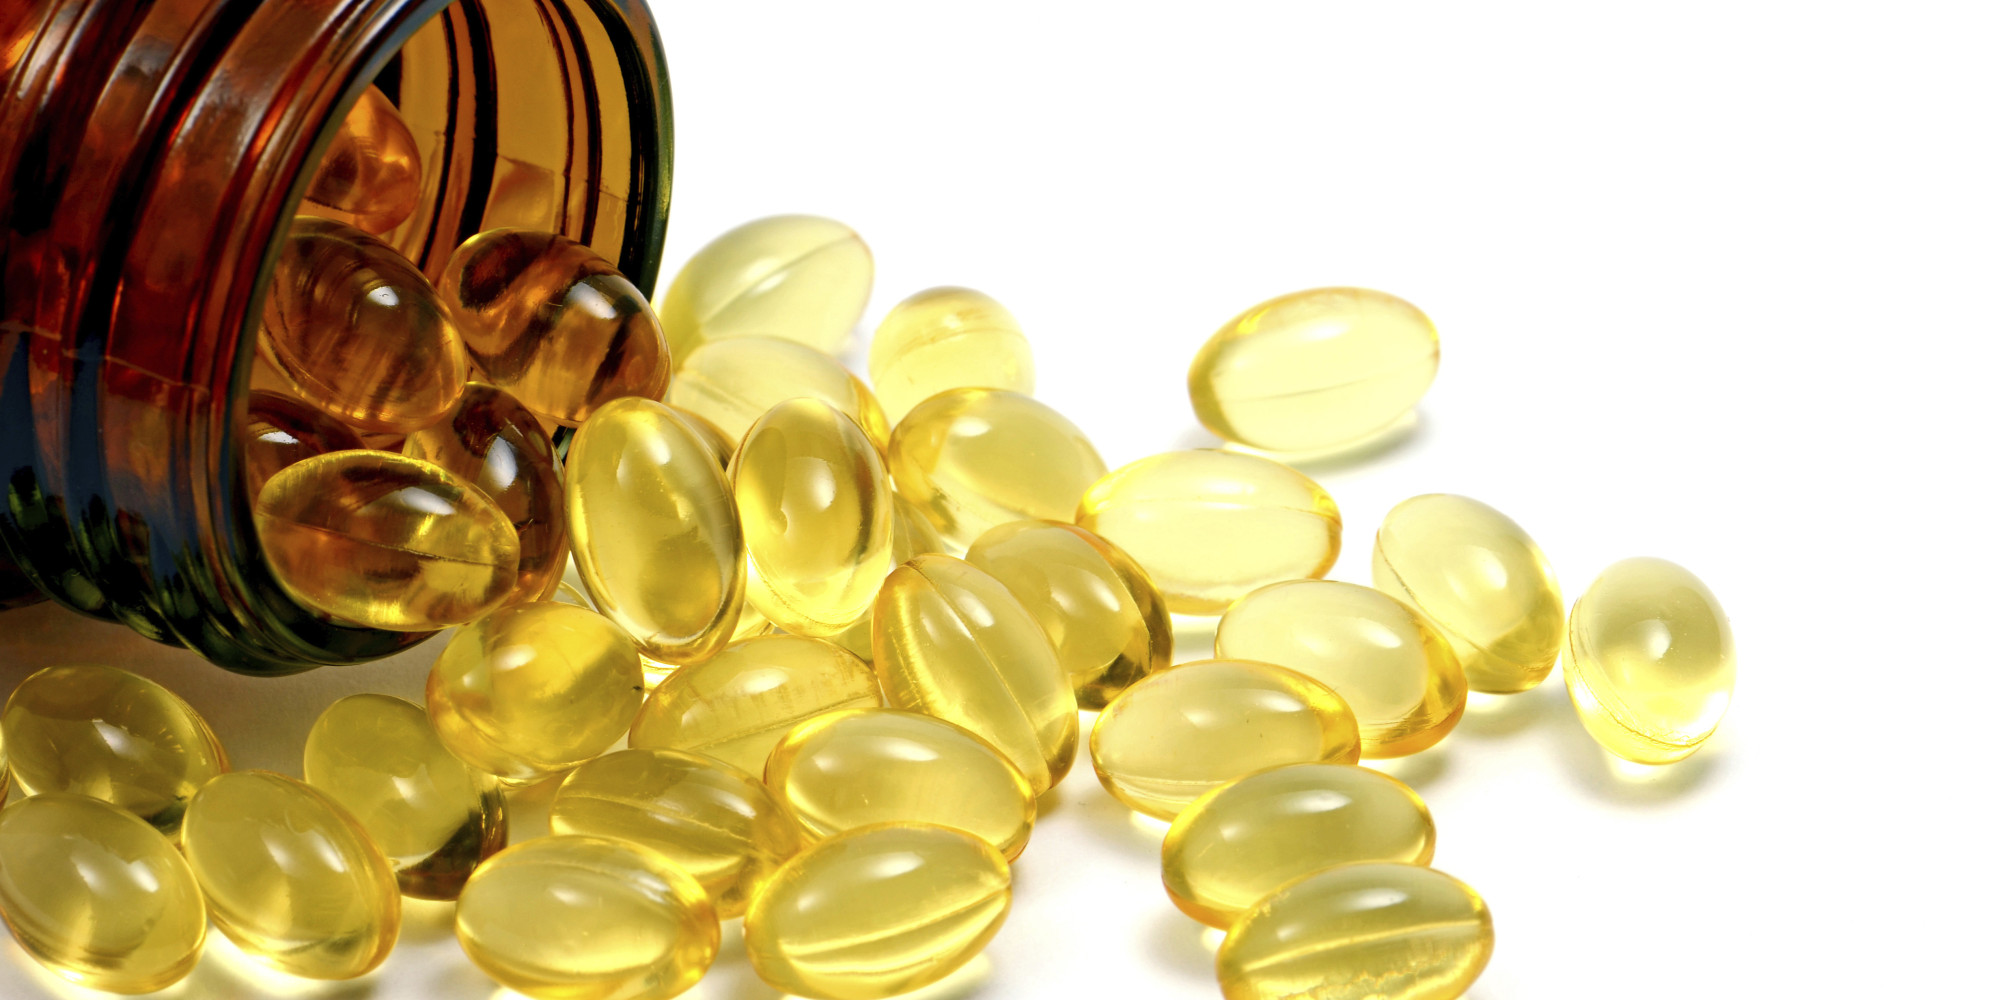 What are the benefits of flaxseed and fish oil?